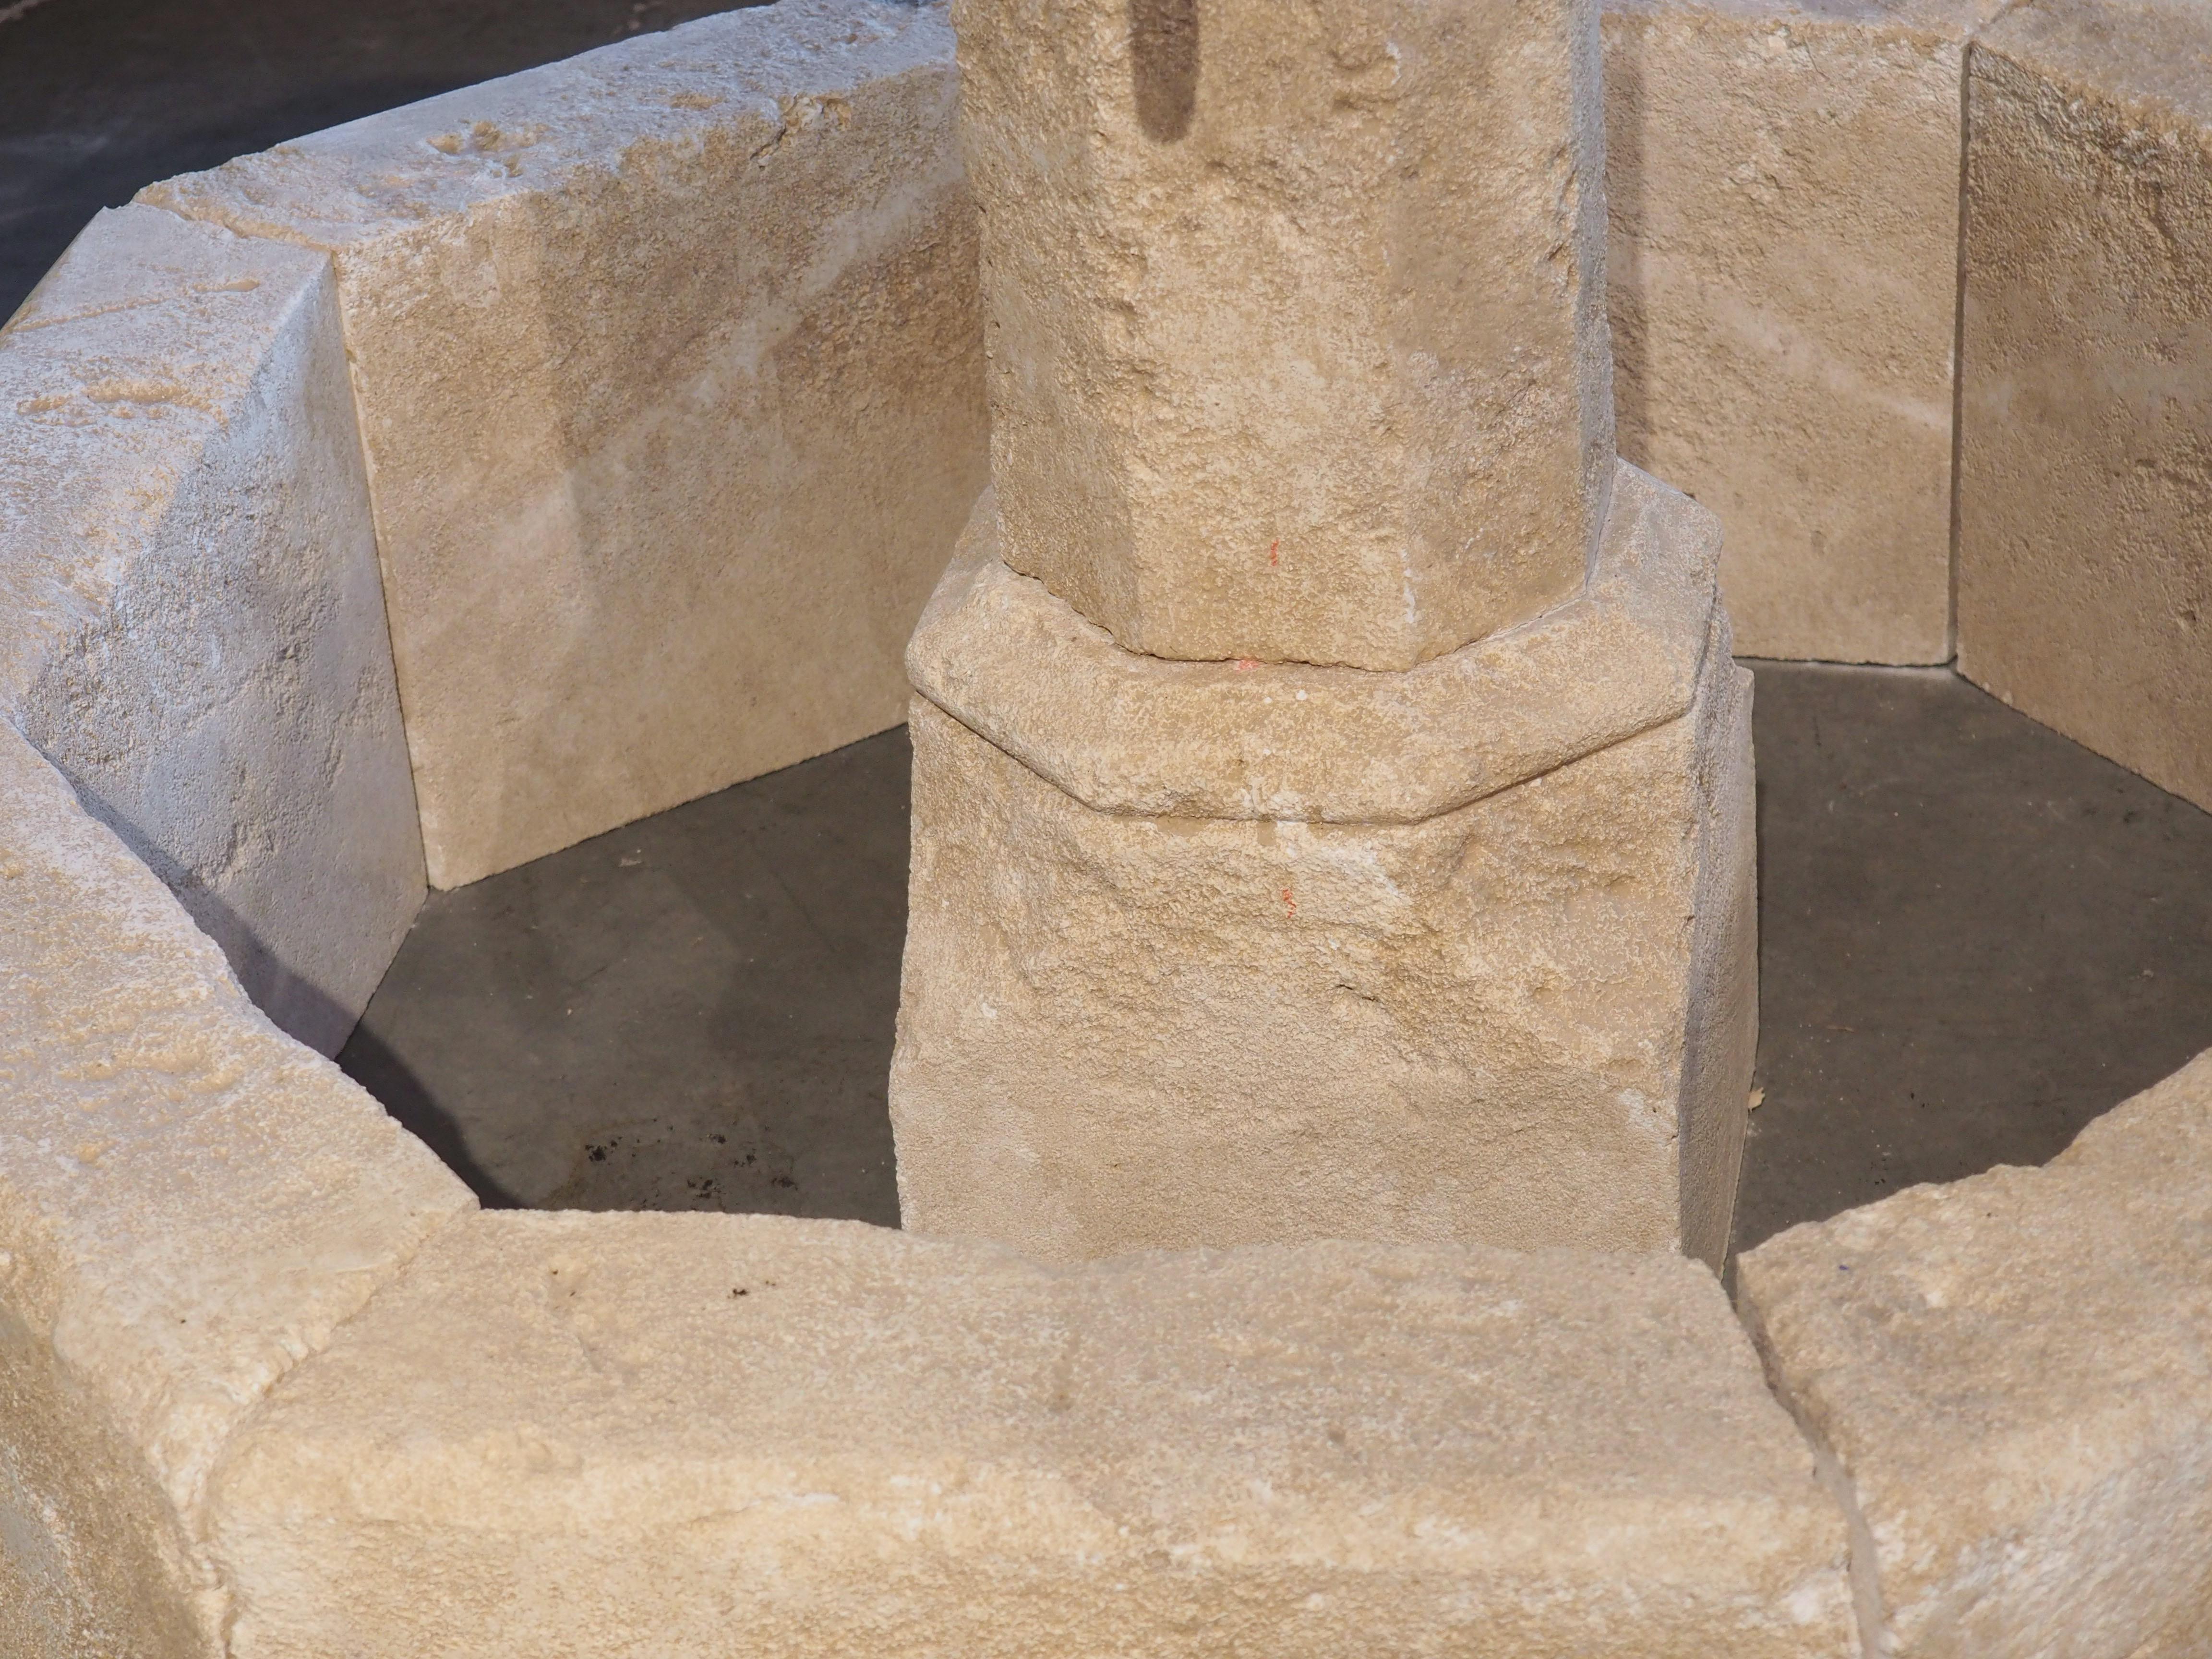 This wonderfully hand carved limestone, small centre fountain from France is octagonal in shape. It has four iron spouts that adorn the centre post. Always used as center fountains in villages throughout the ages in France, they are a beautiful